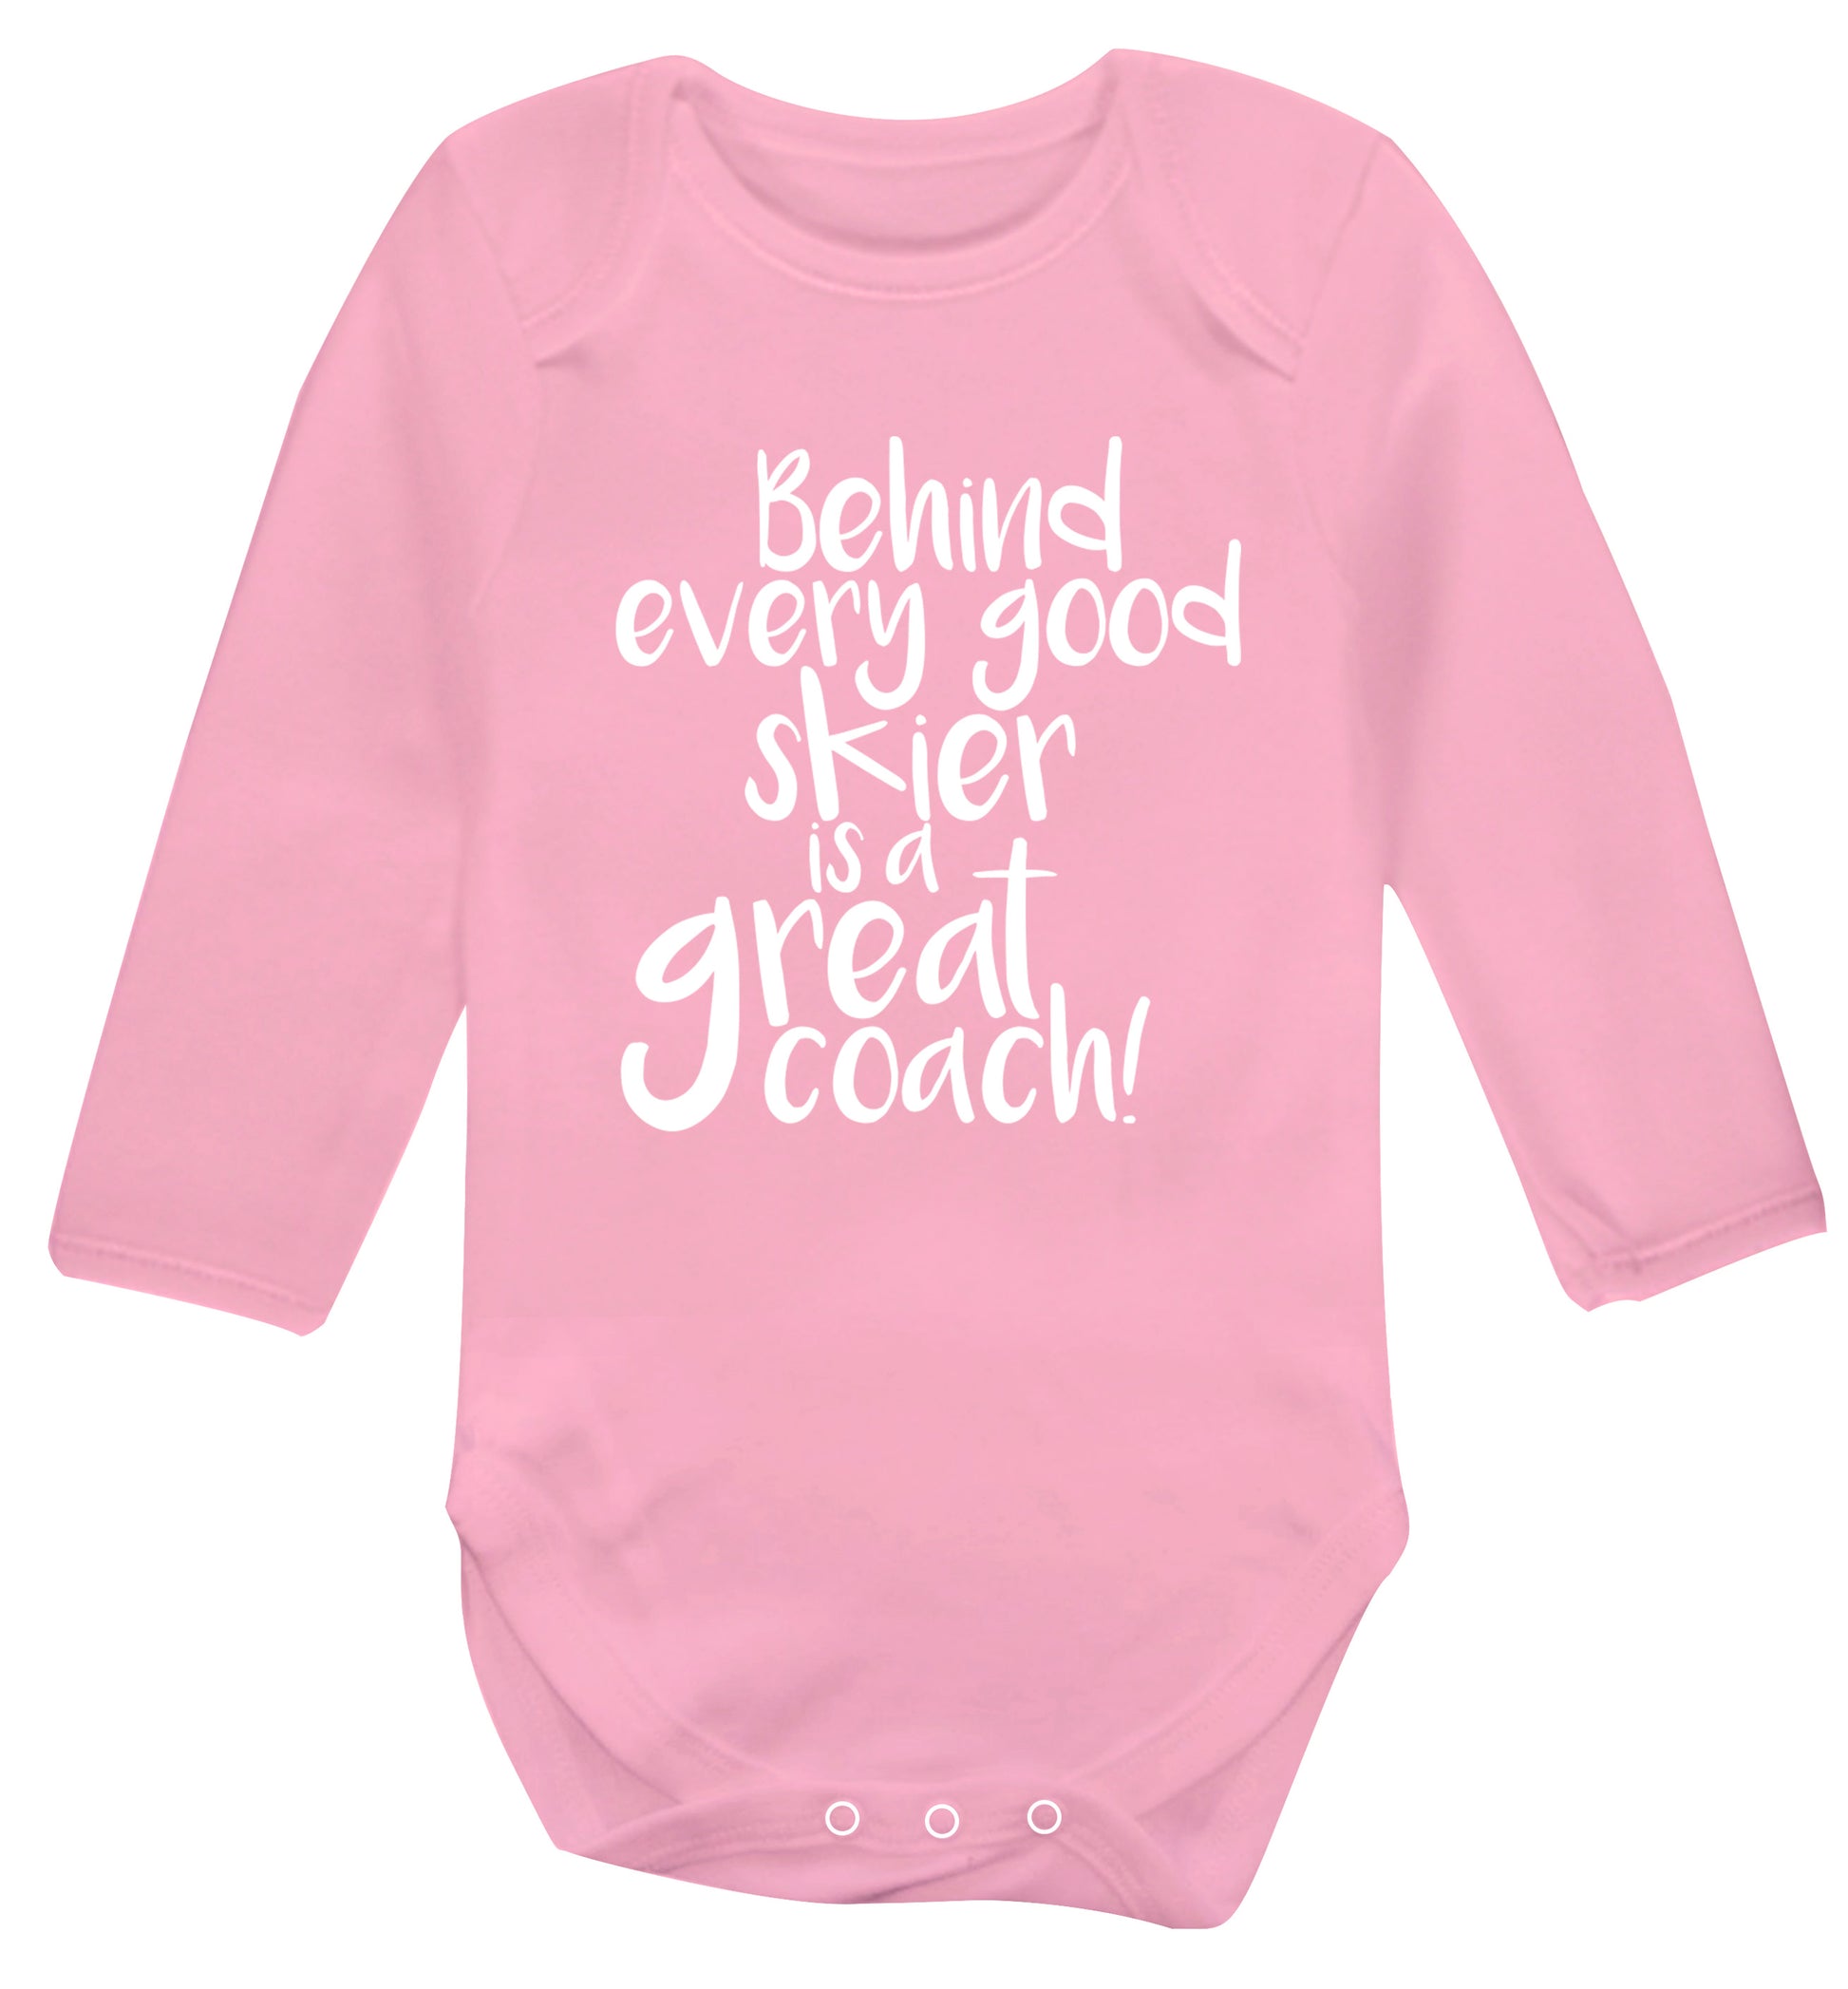 Behind every good skier is a great coach! Baby Vest long sleeved pale pink 6-12 months